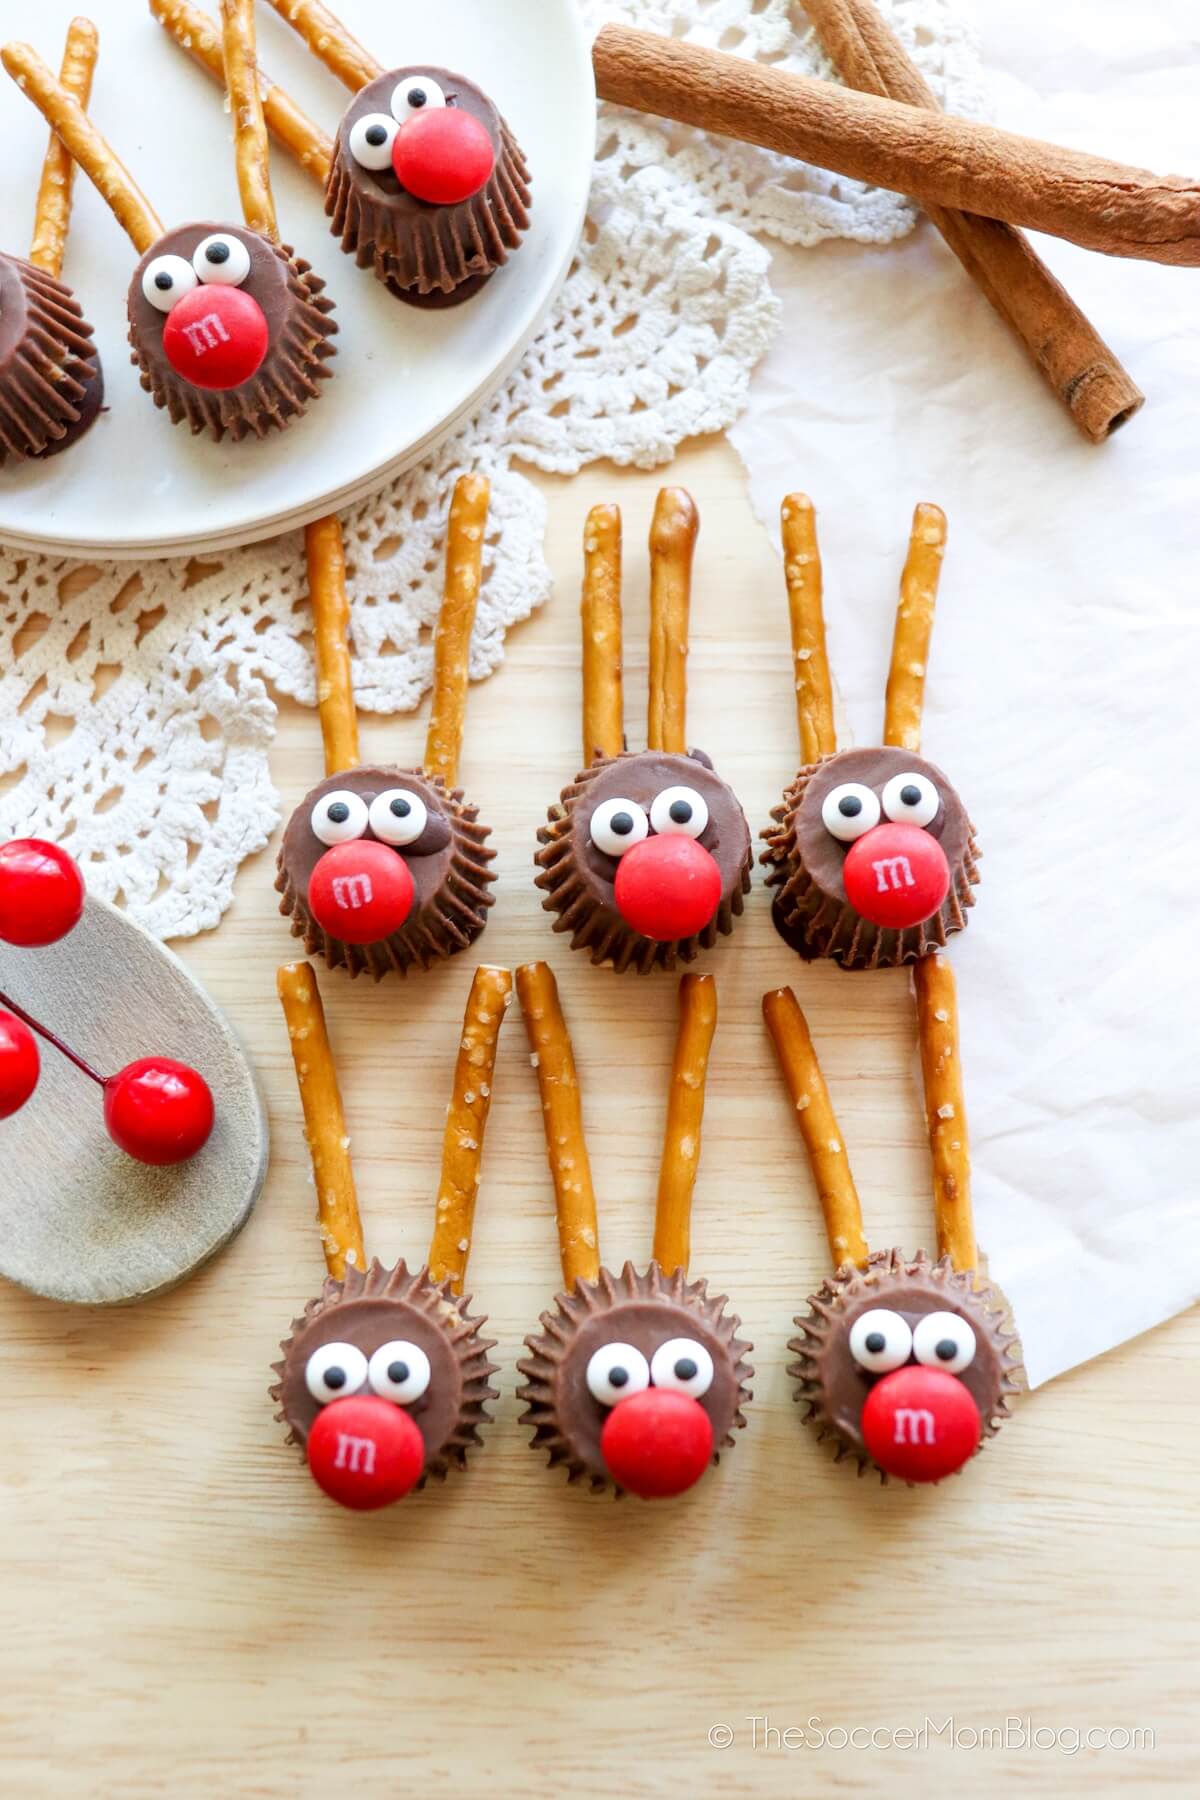 https://thesoccermomblog.com/wp-content/uploads/2022/10/Reeses-Cup-Rudolph-Treats-1.jpg